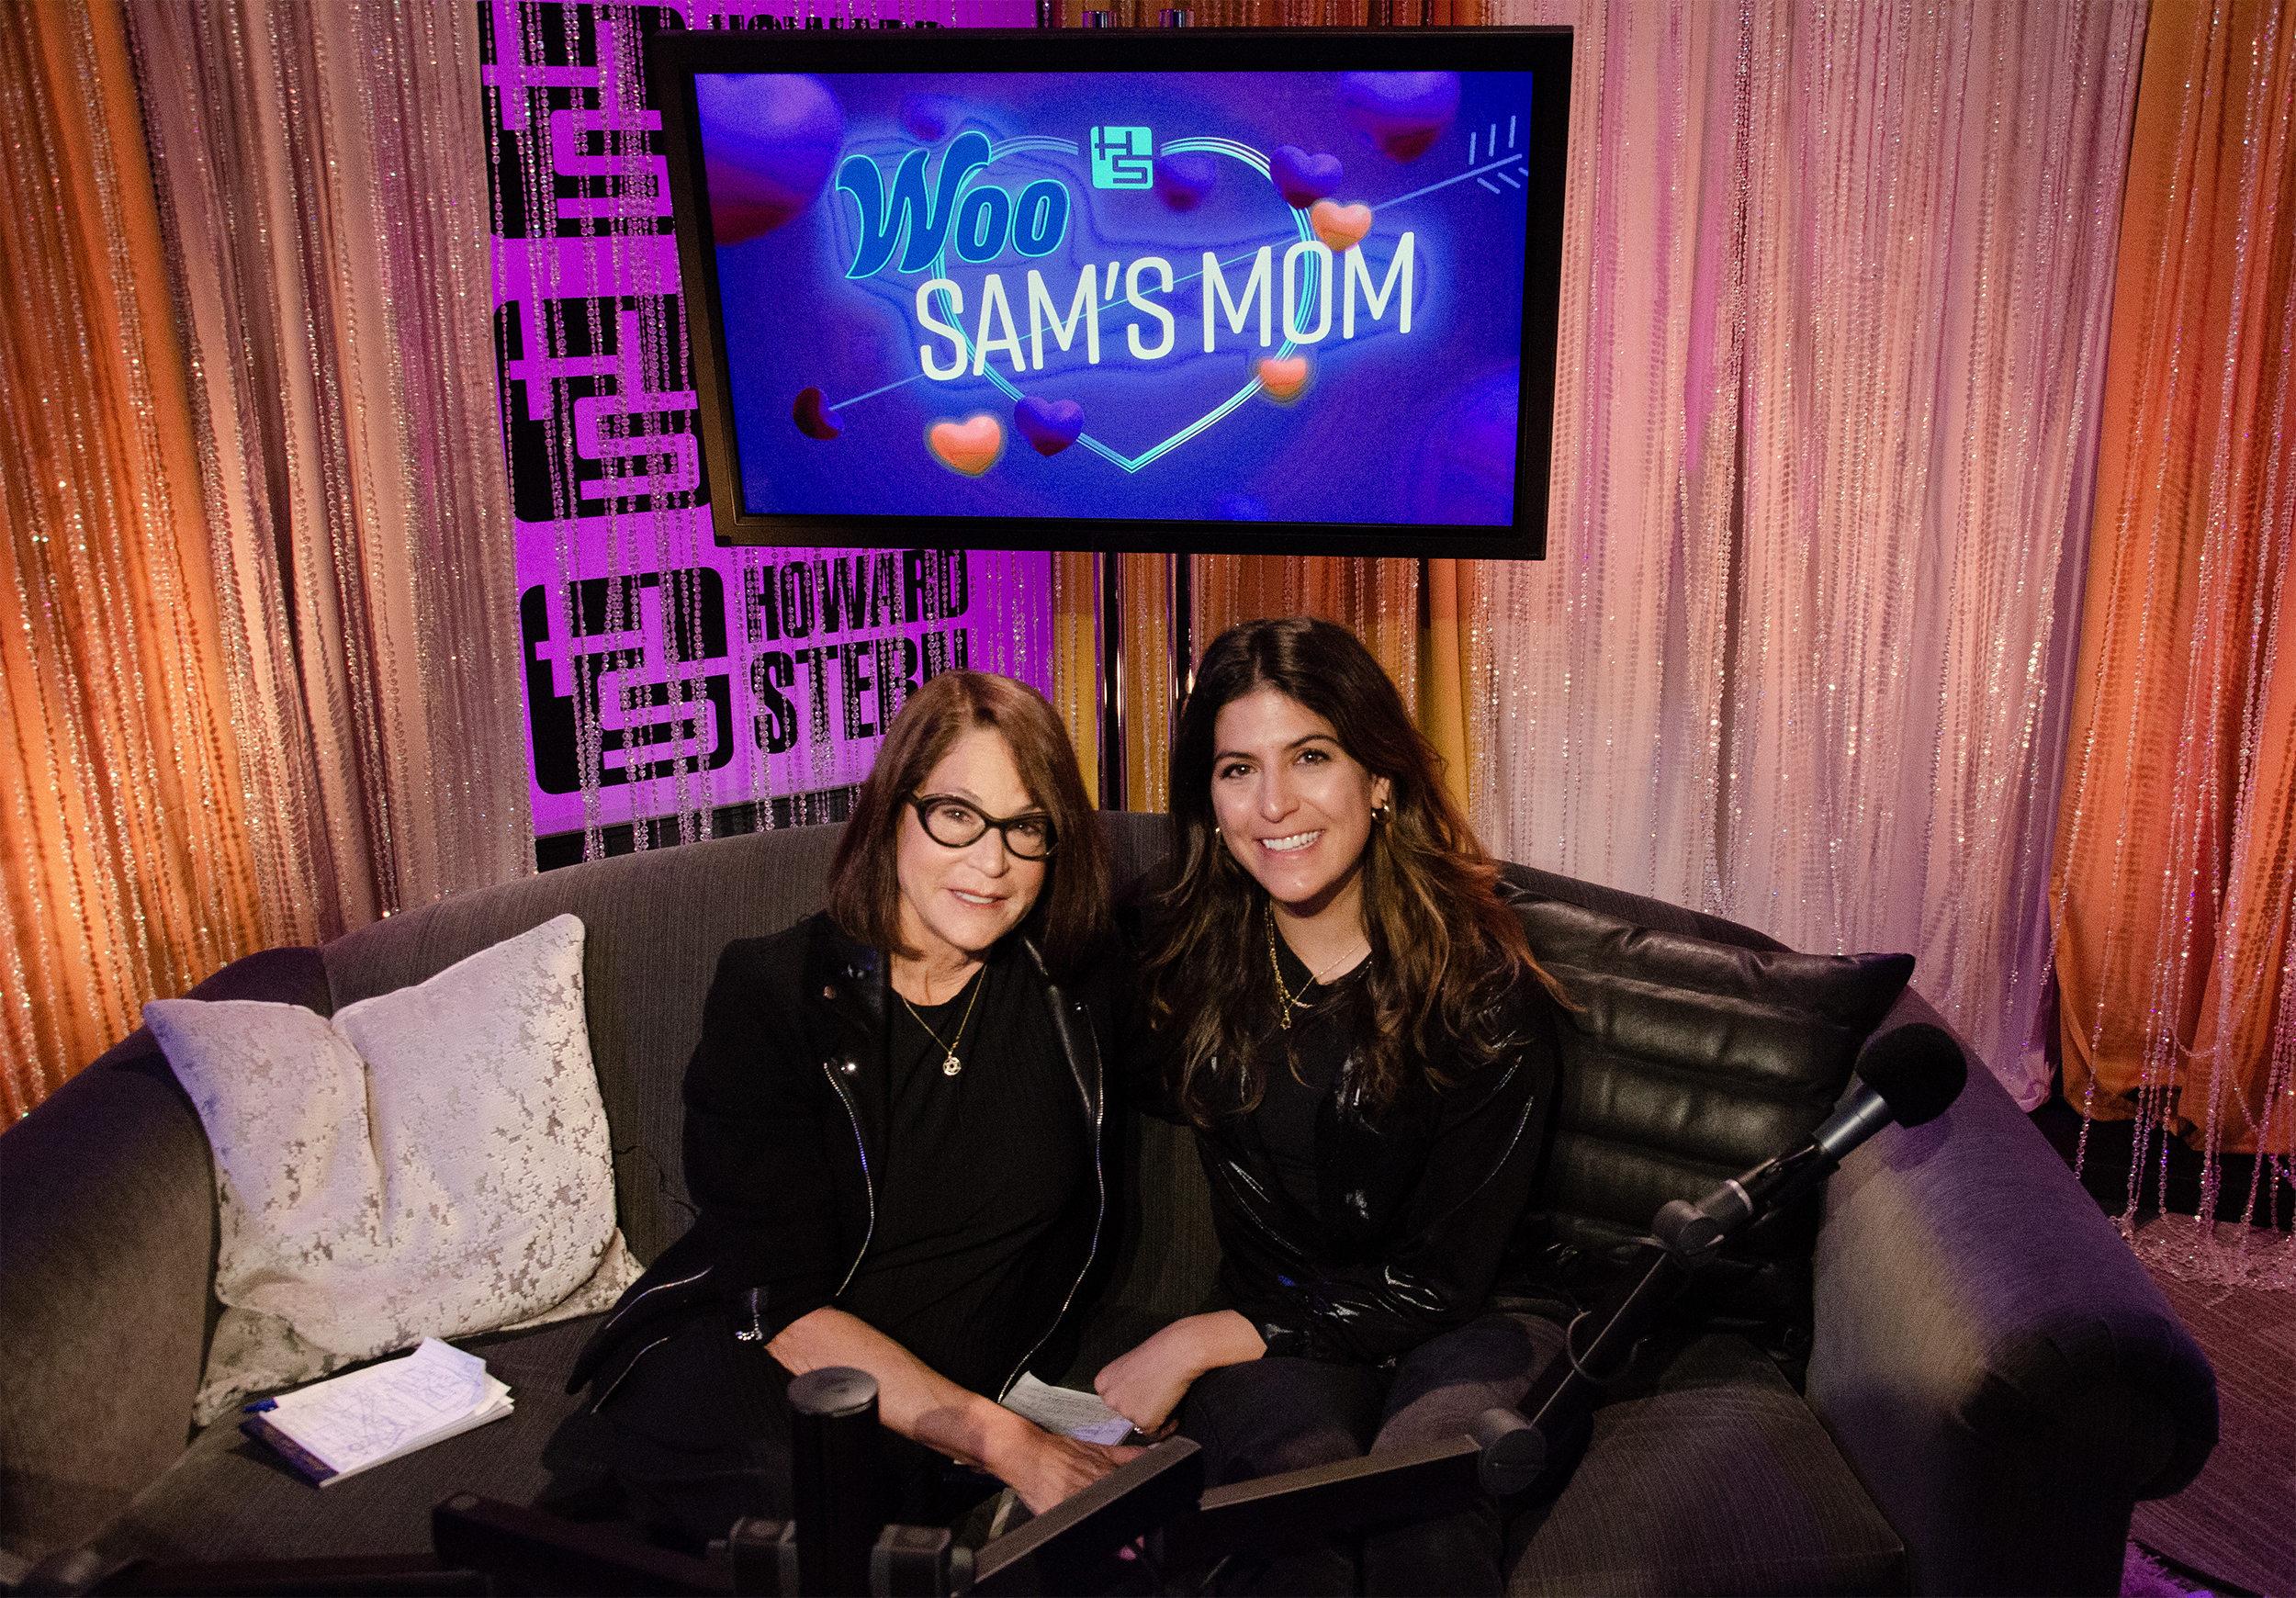 Sam Mom Xxx - VIDEO & PHOTOS: 3 Bachelors Compete to Win a Date on Woo Sam's Mom | Howard  Stern